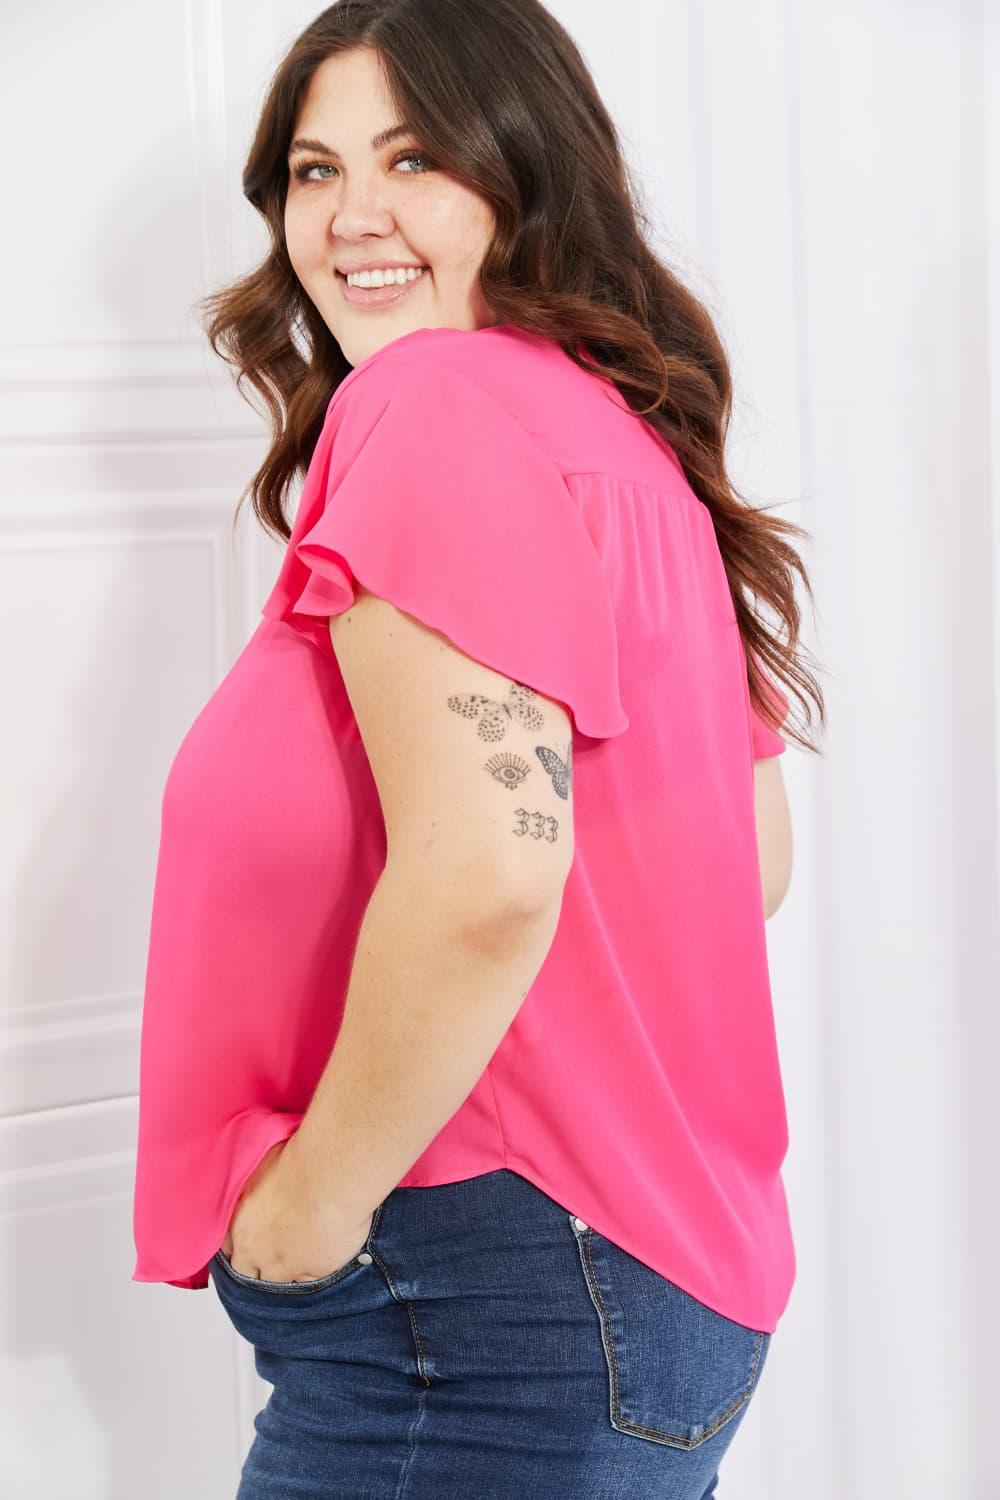 Sew In Love Just For You Full Size Short Ruffled Sleeve Length Top in Hot Pink - Immenzive